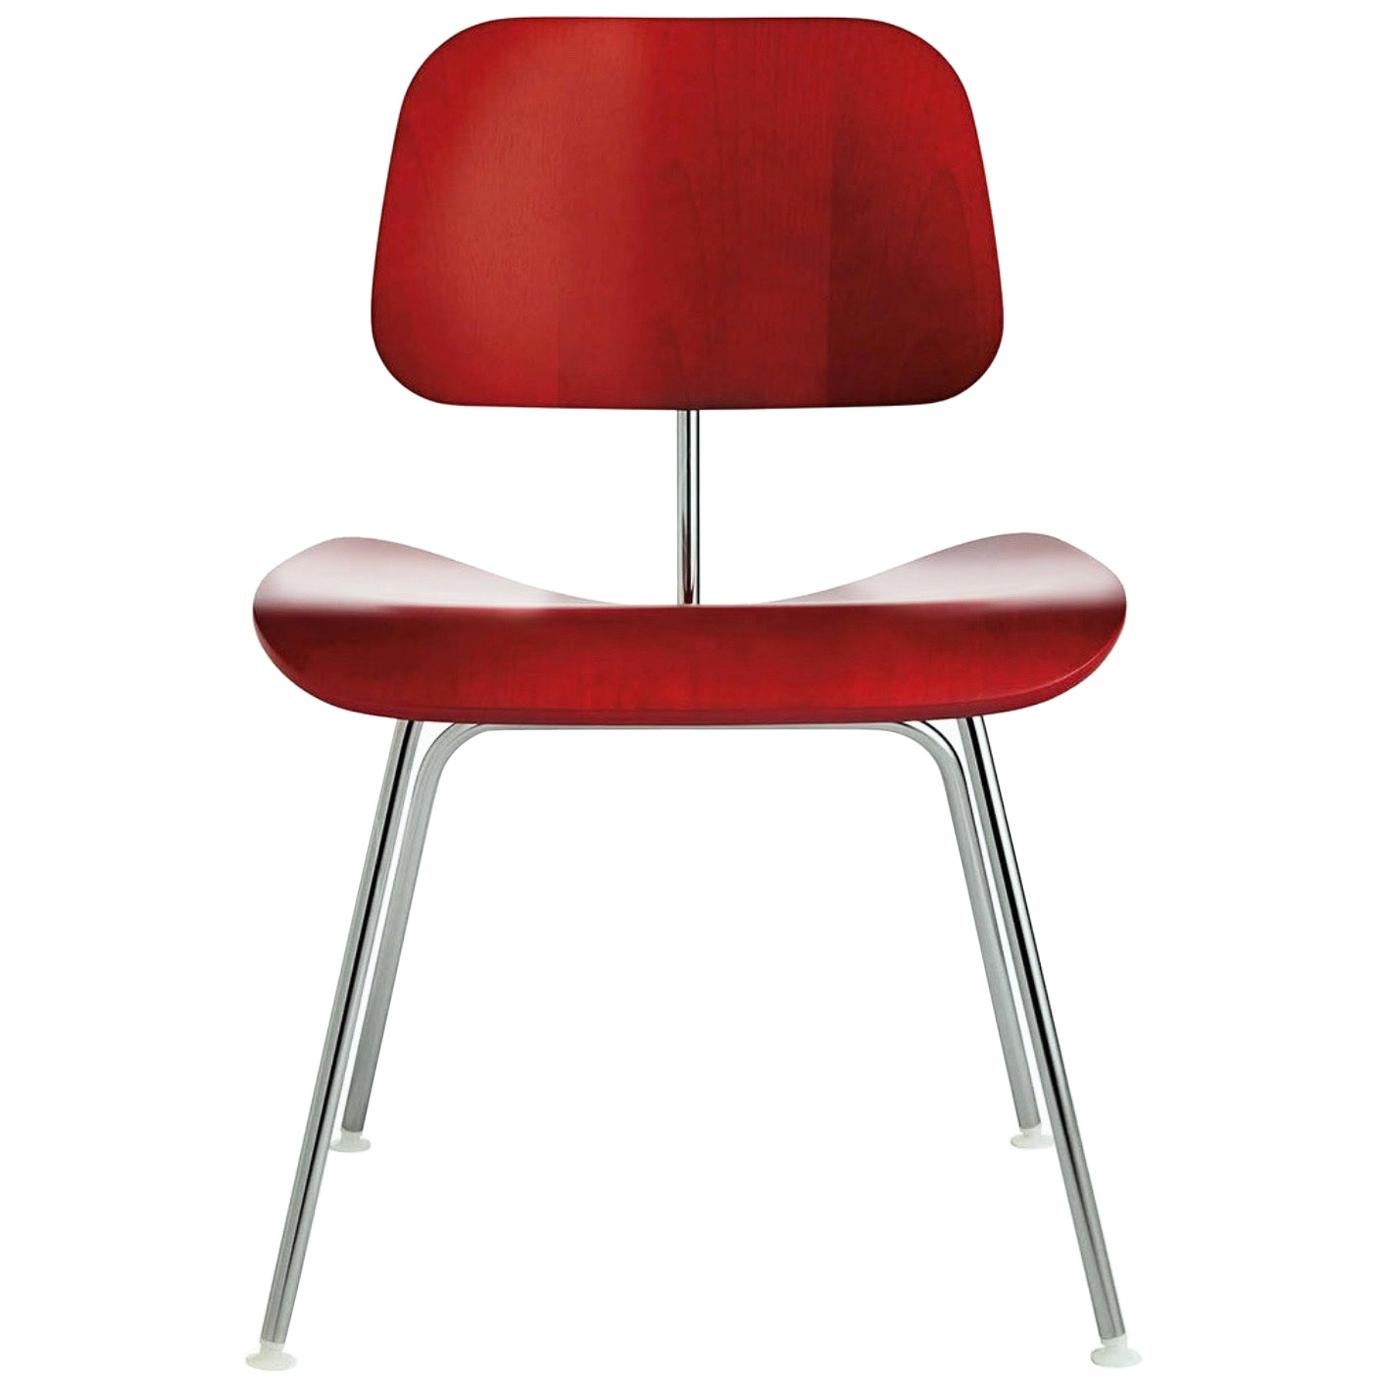 Stainless Steel Pair of Charles and Ray Eames Red Beech DCM Chair, Herman Miller